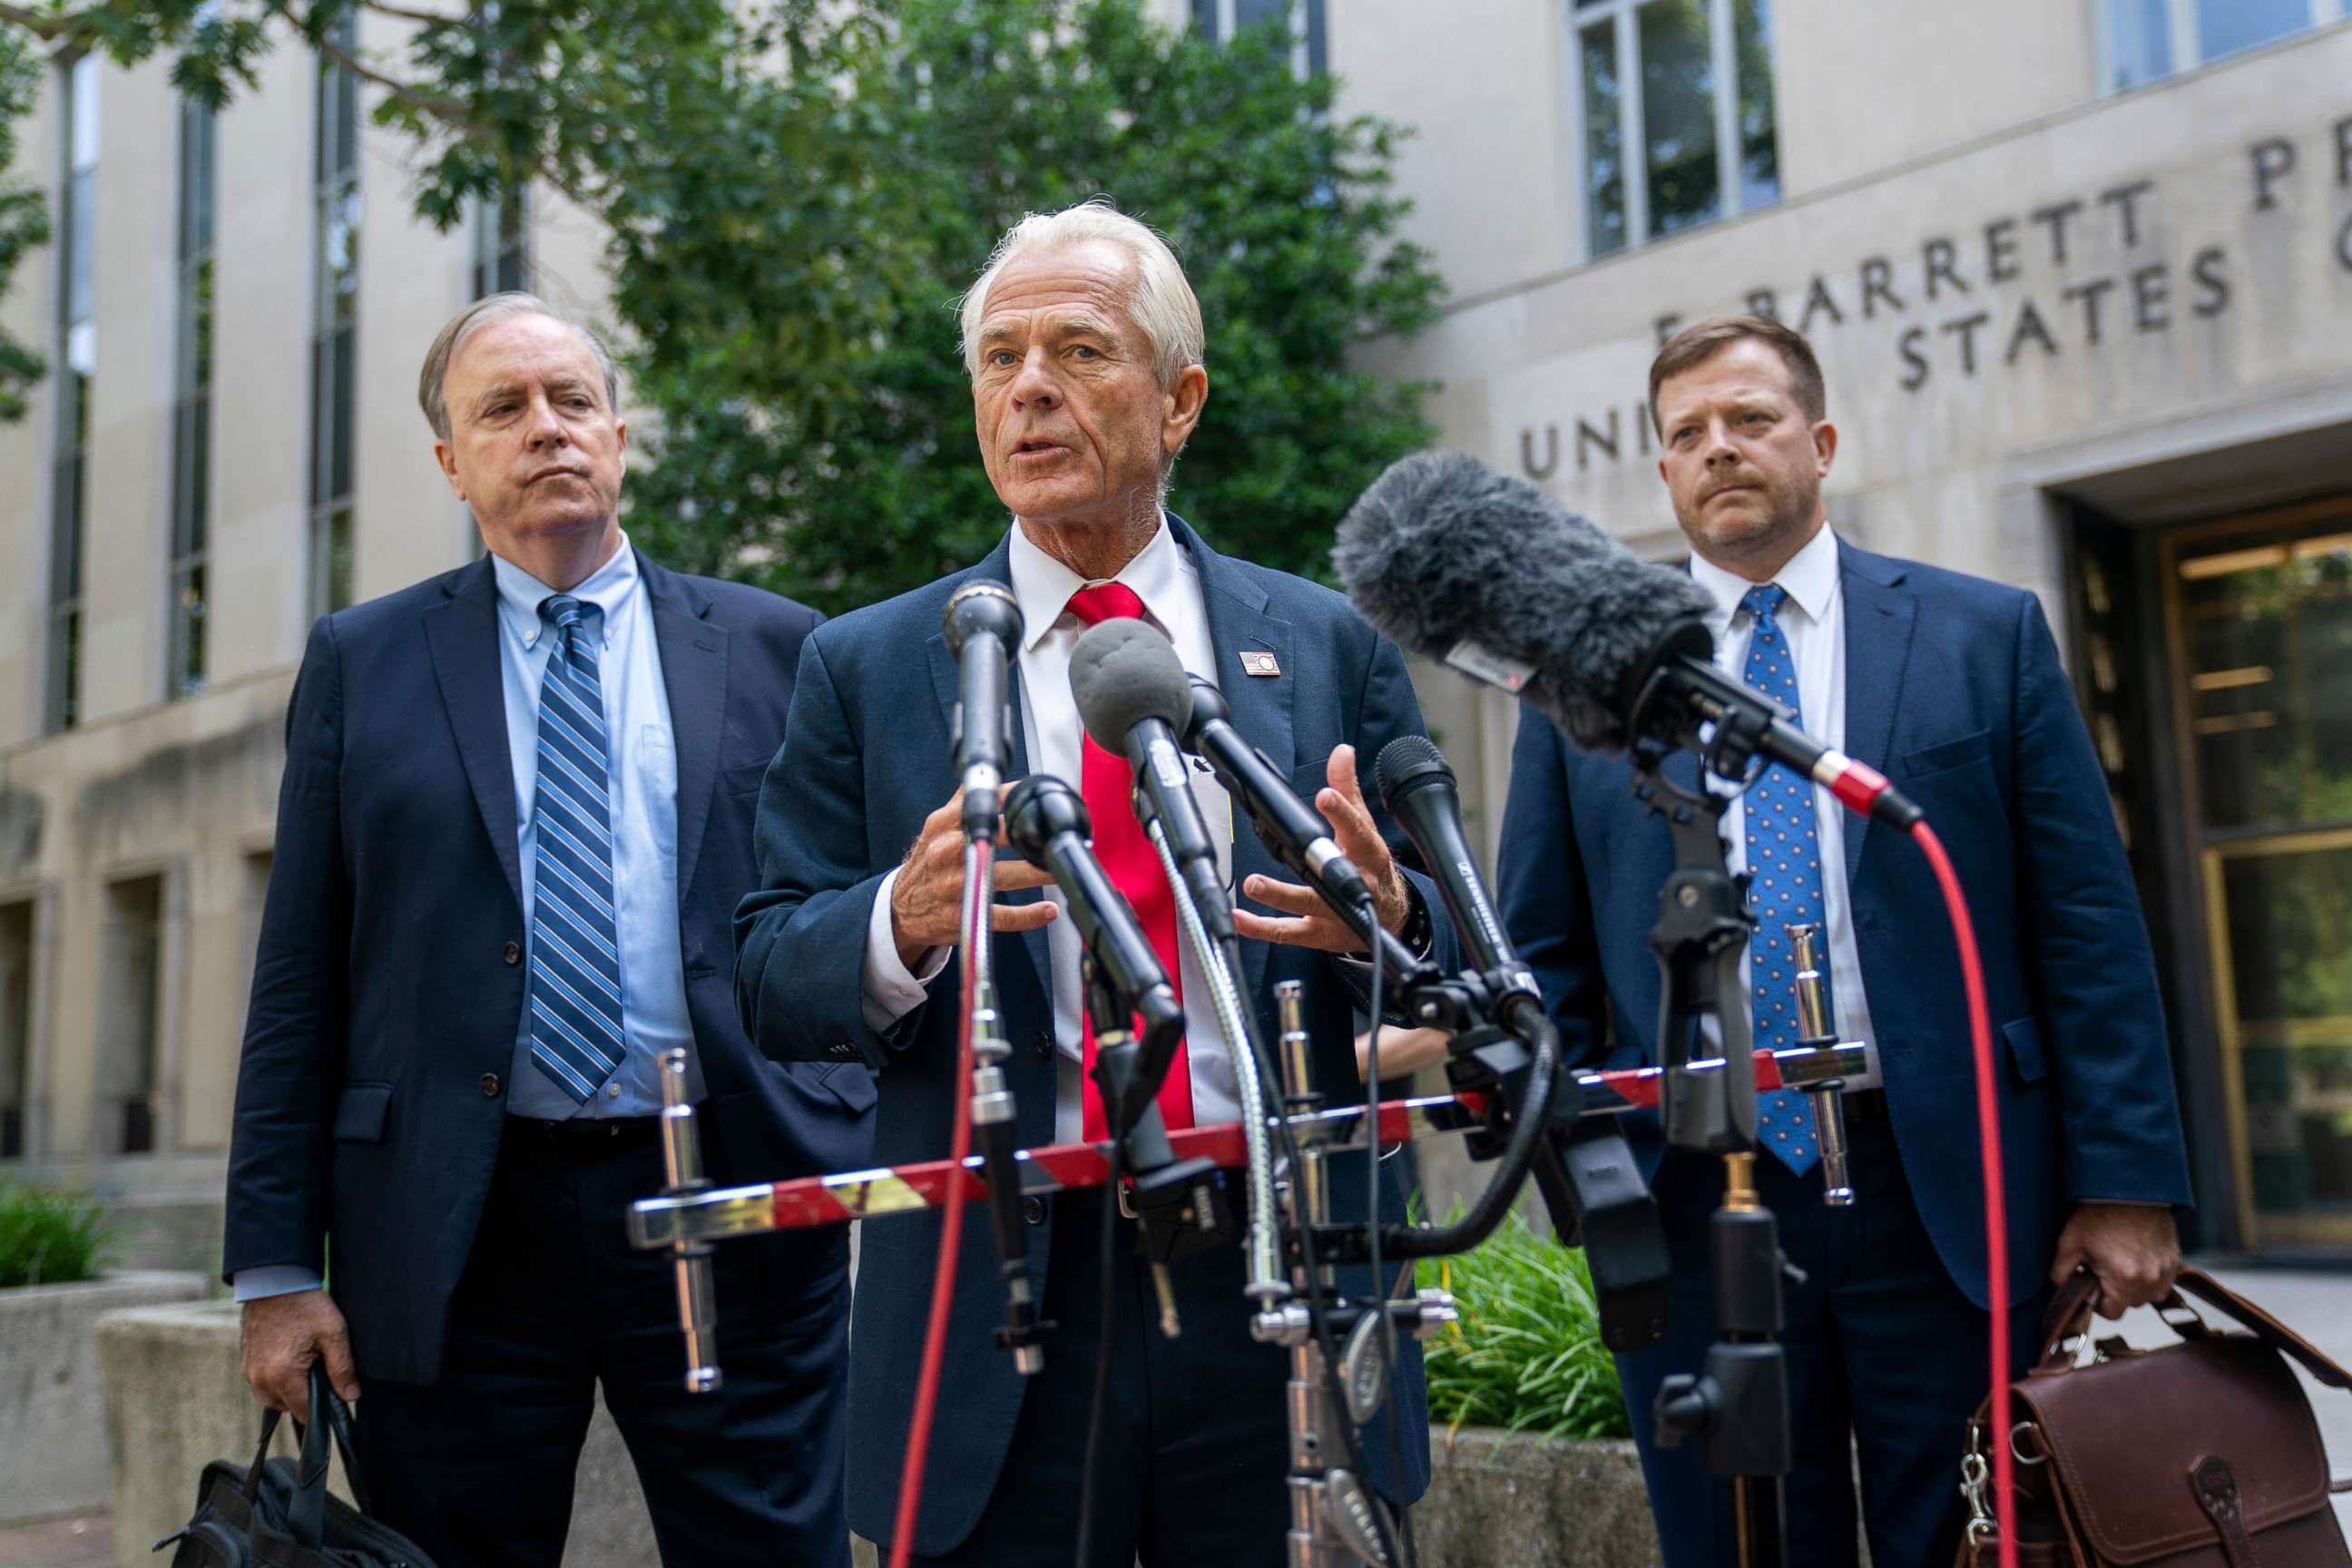 PHOTO: Former Trump administration trade adviser Peter Navarro, with his attorneys John Rowley, left, and John Irving, right, makes a statement to the media following a court appearance at the US District Court in Washington, DC, June 17, 2022.